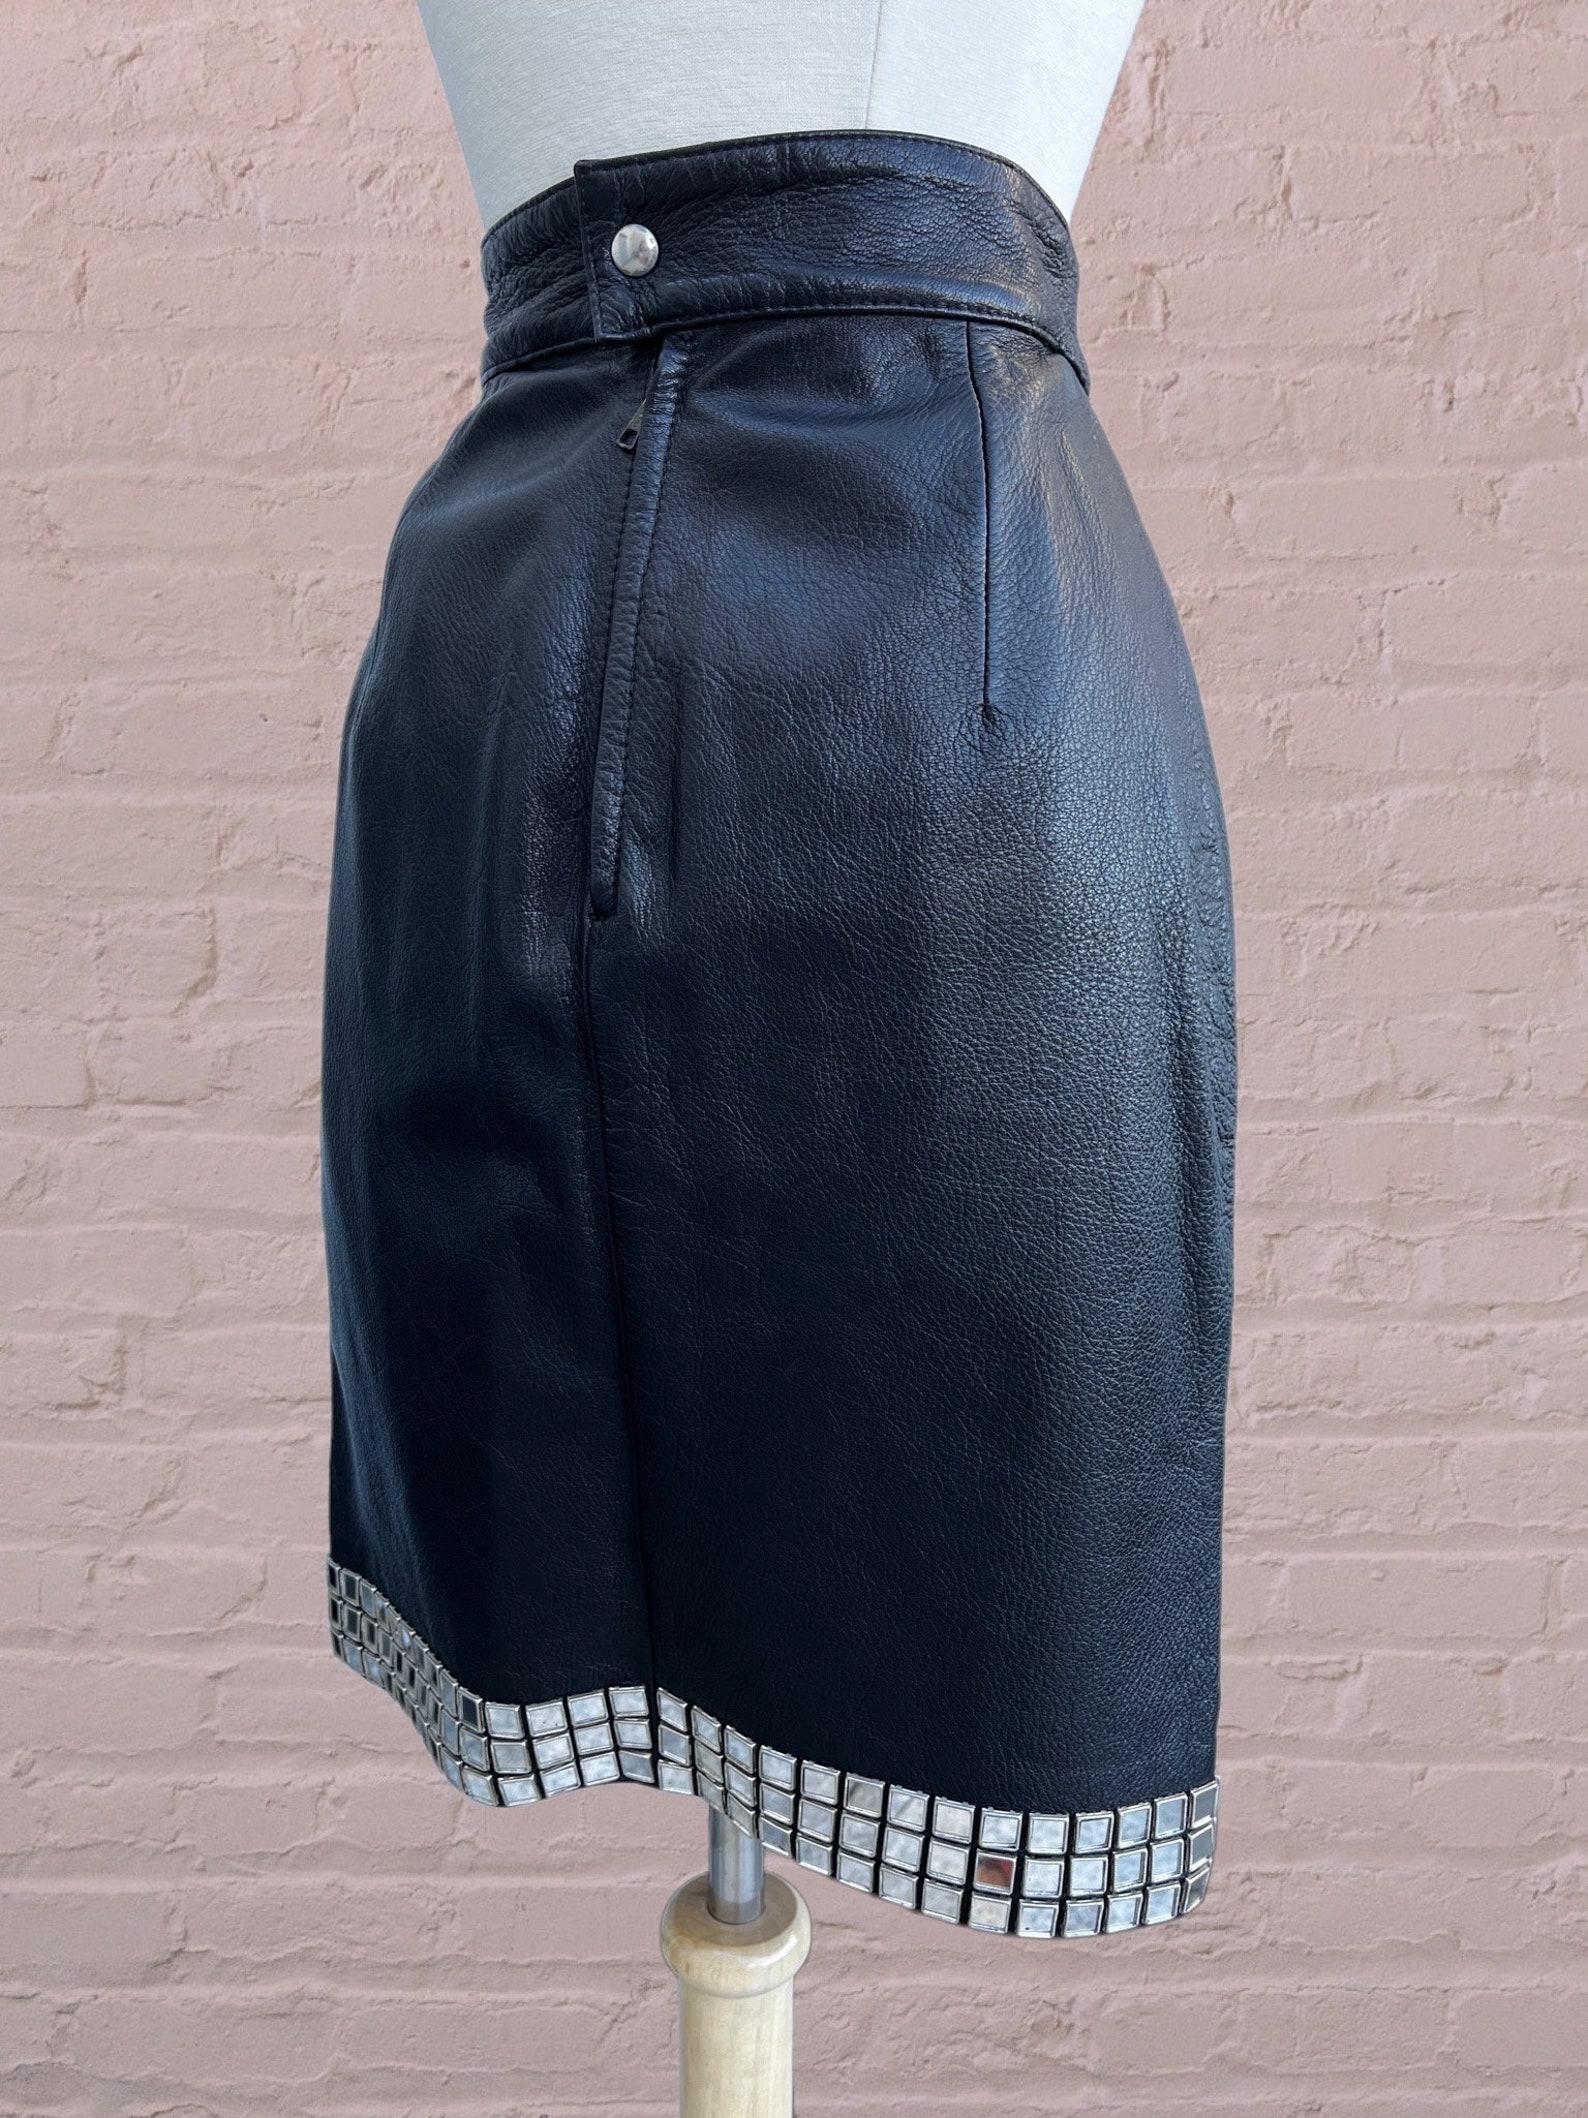 Moschino Black Leather Mirror Skirt, Circa 1990 For Sale 2